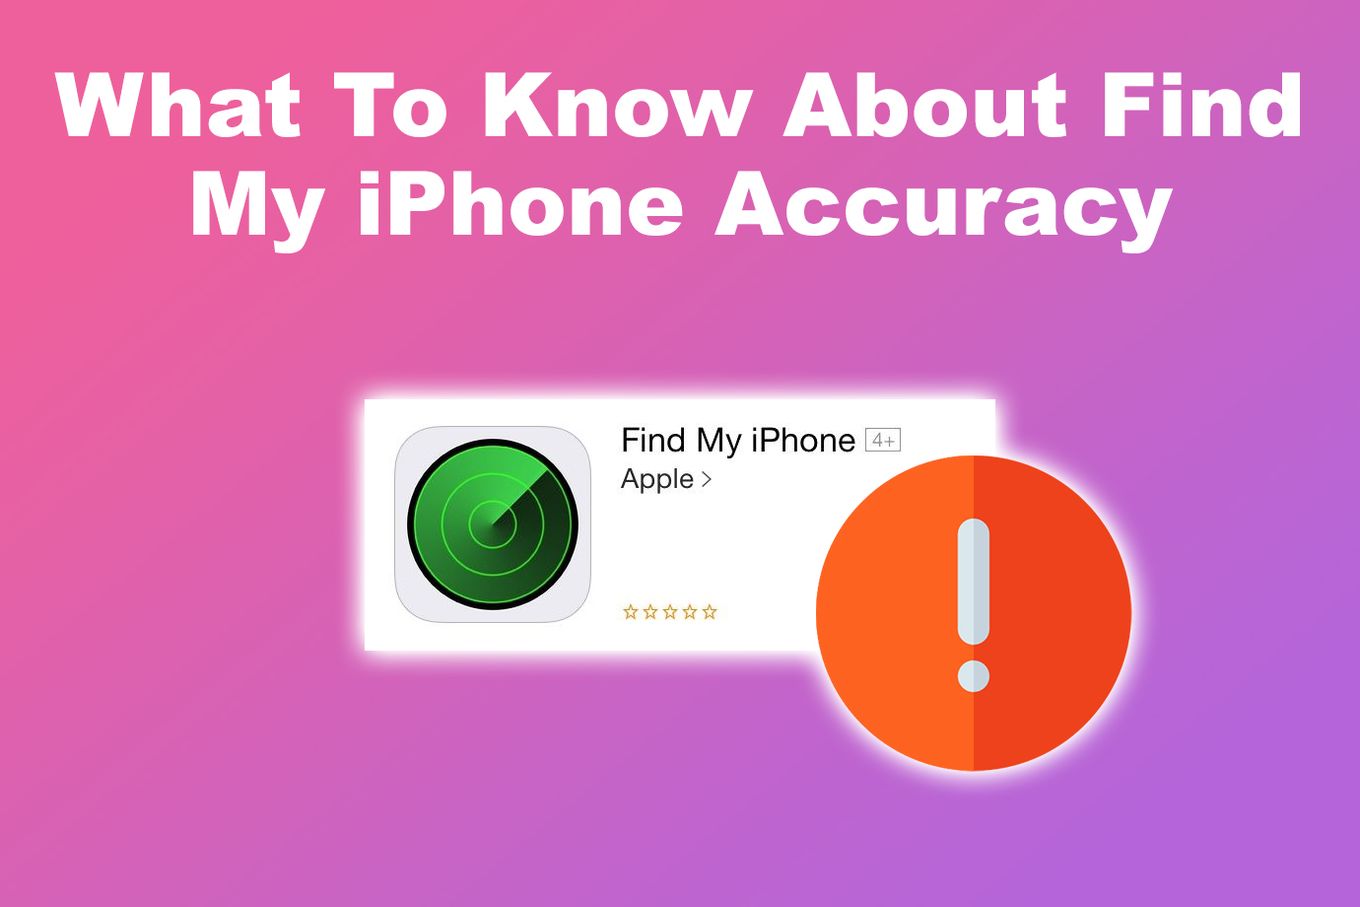 What To Know About Find My iPhone Accuracy